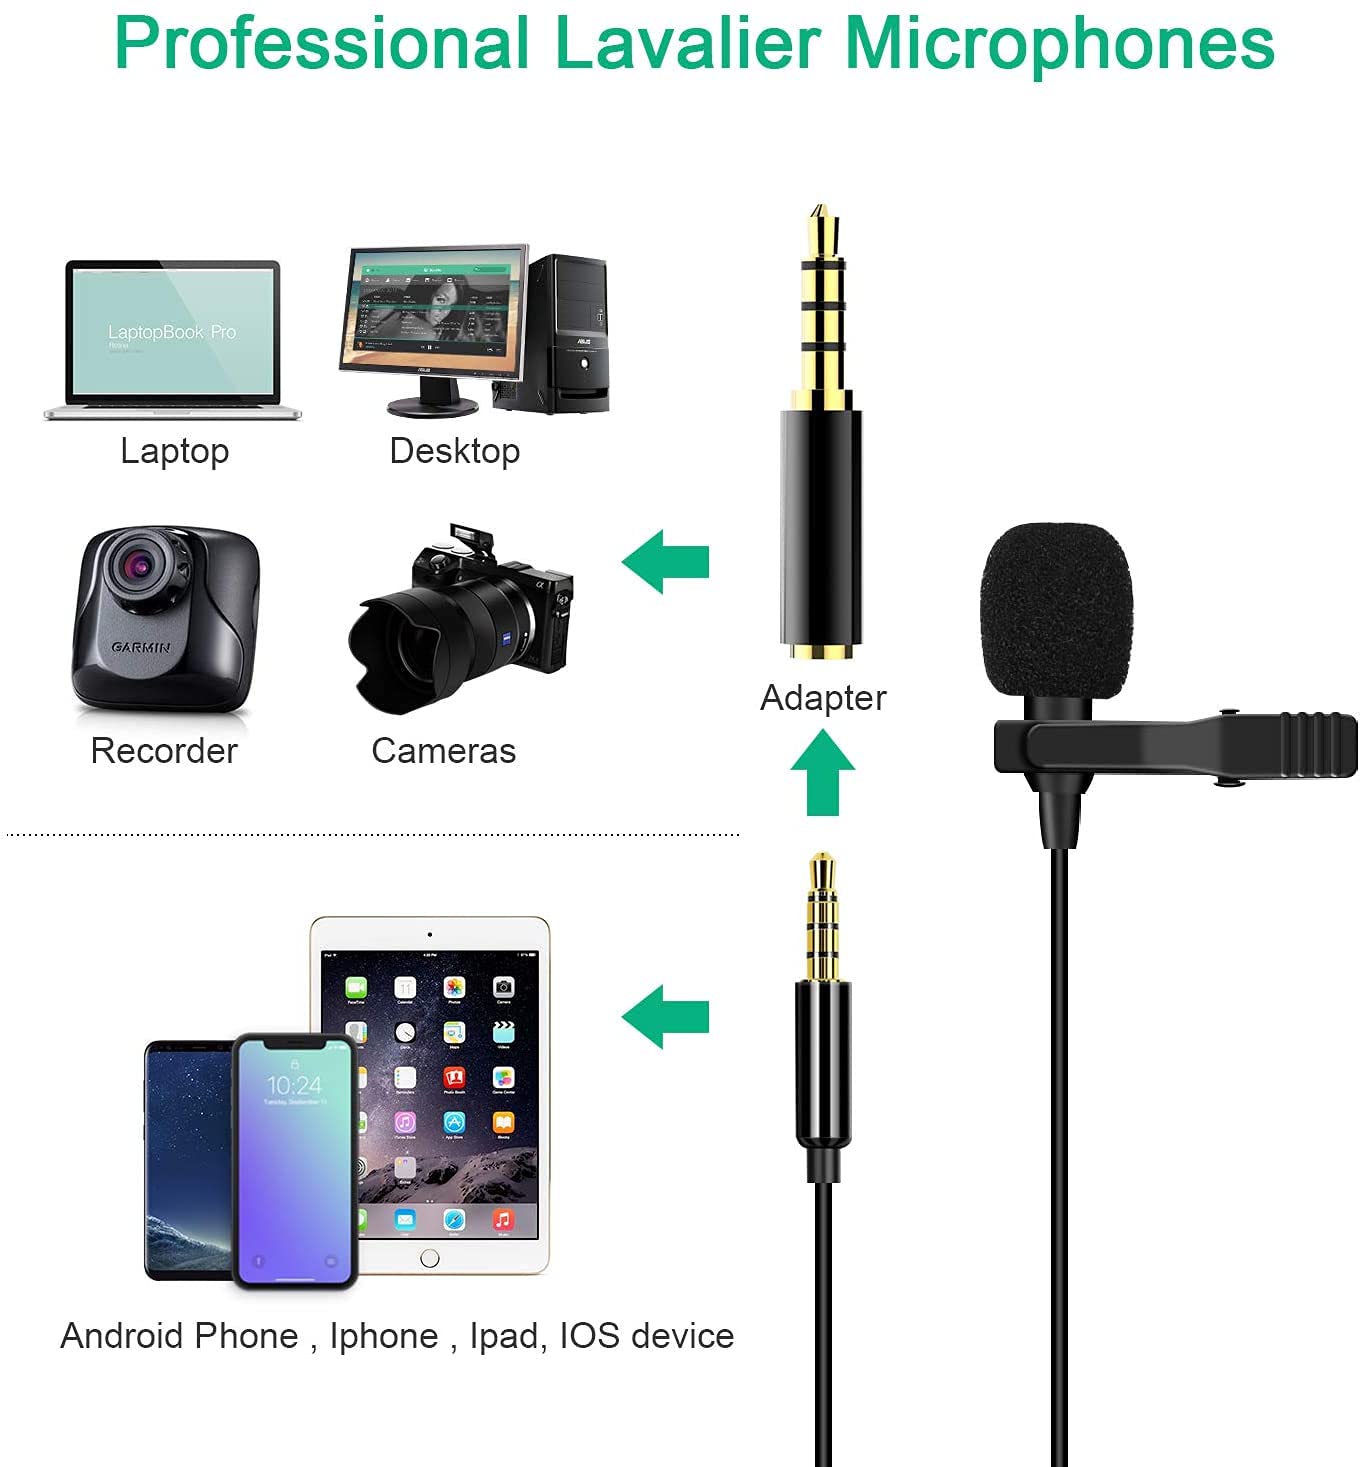 DIGITNOW Professional Lavalier Lapel Microphone Voice Omnidirectional Condenser Mic for iPhone Android Smartphone Laptop PC Computer,Recording Mic for YouTube Interview Video